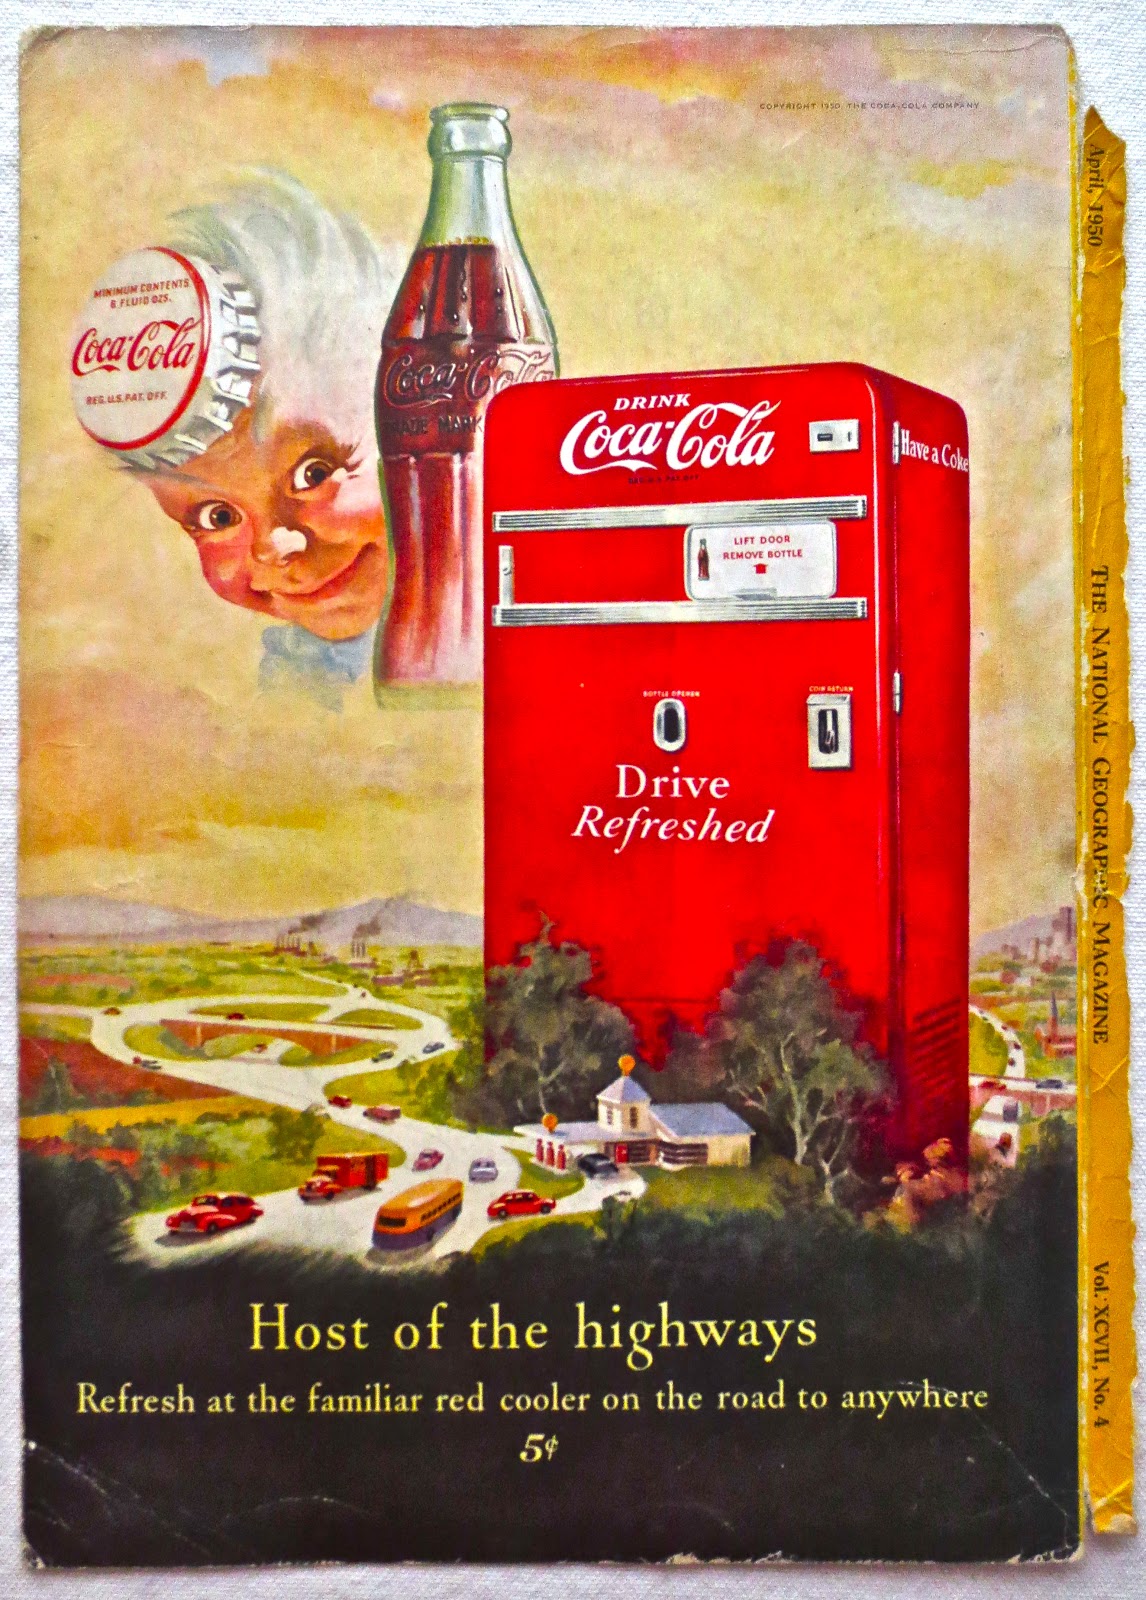 https://3.bp.blogspot.com/-EiApzPoqmVo/UaLRtJ4vZKI/AAAAAAAAW8M/jsNUYxVi4As/s1600/1950s+Vintage+Coca+Cola+Advertisement+From+National+Geographic+Back+Page+7.JPG